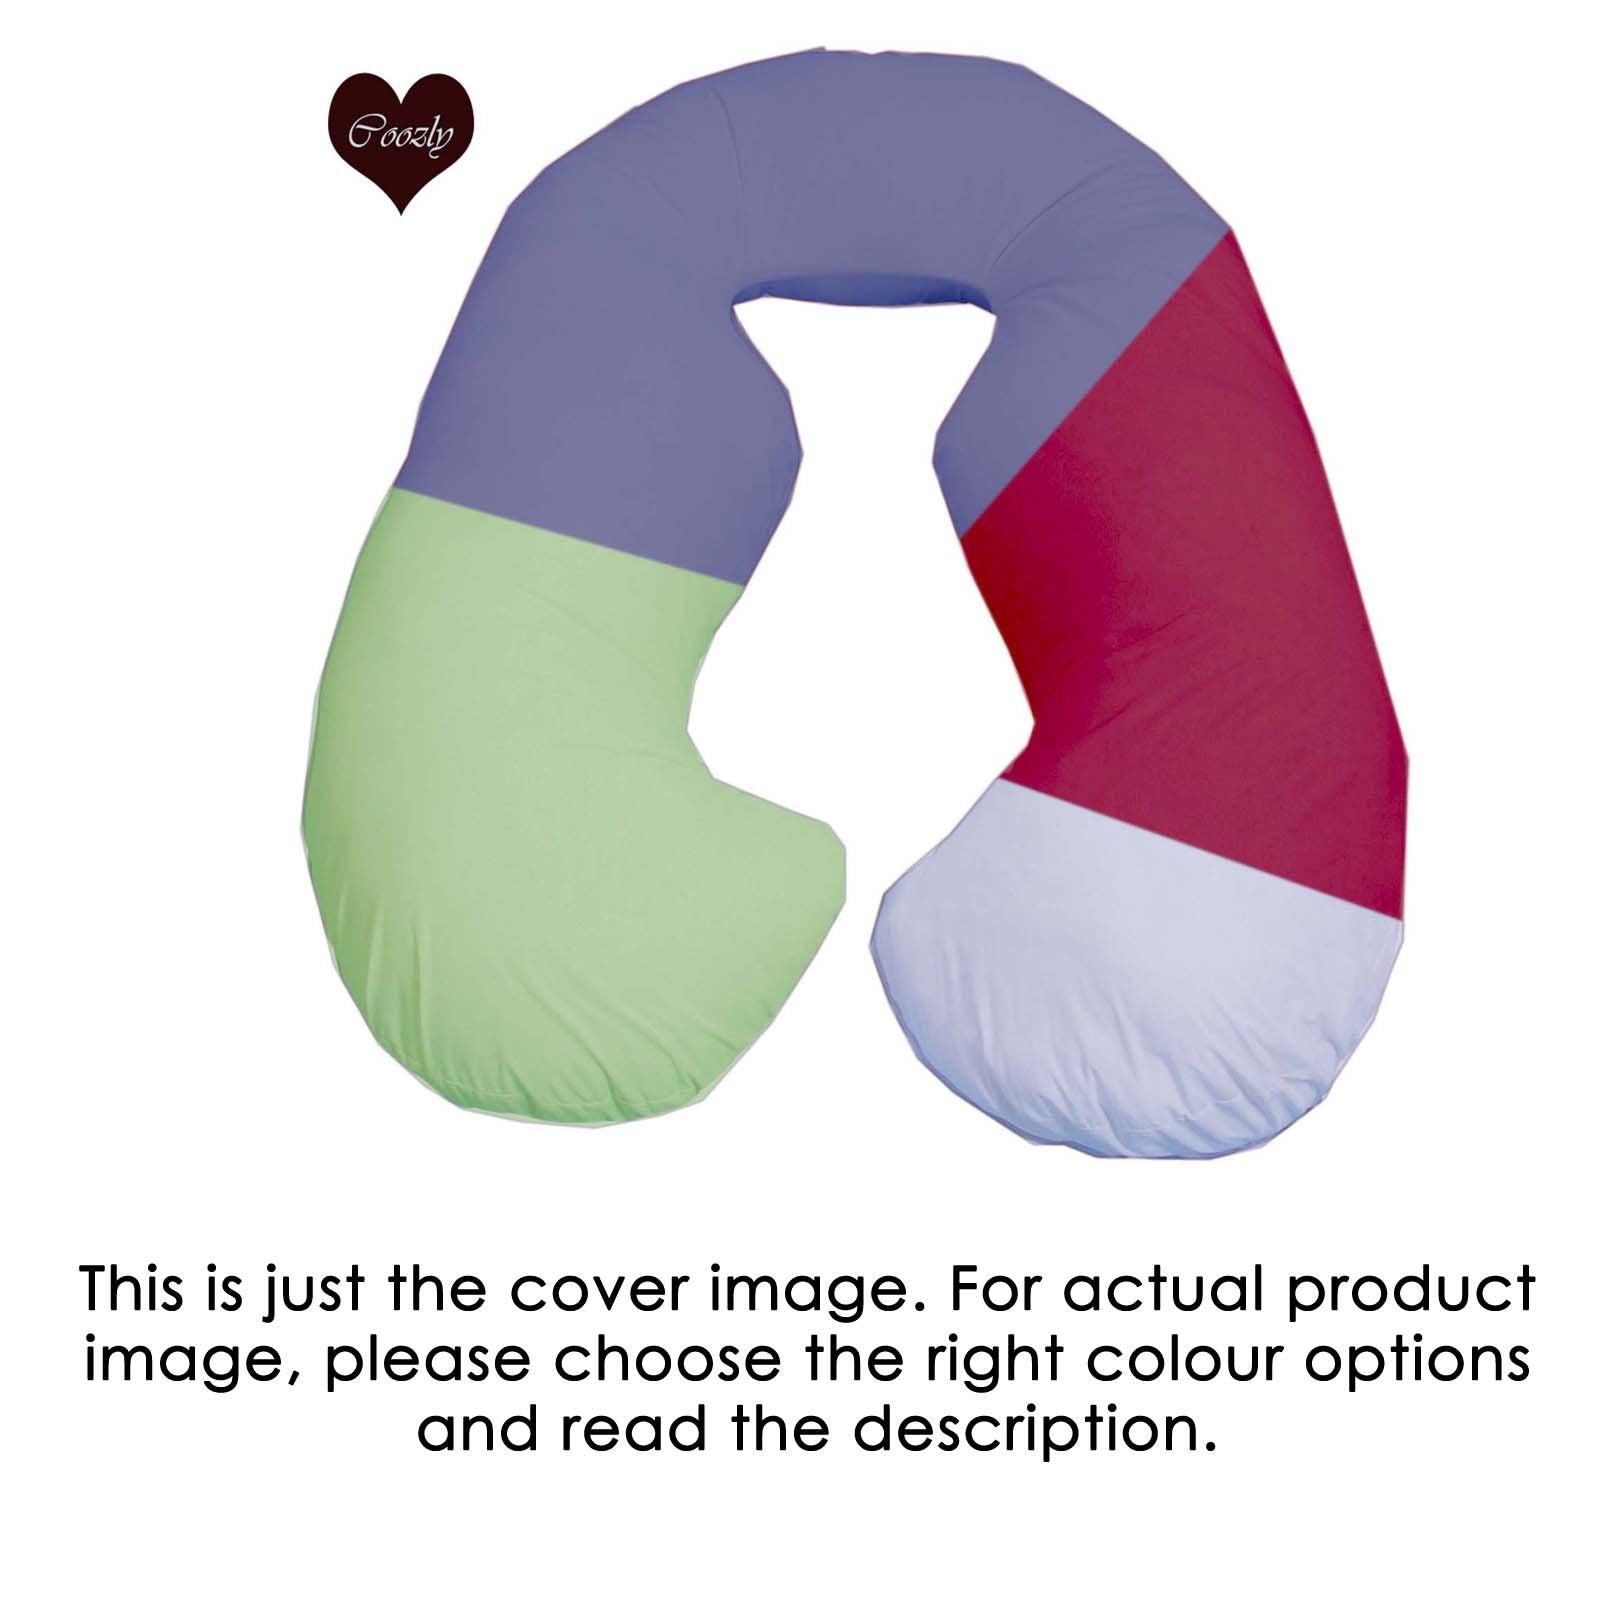 Body Contour Premium LYTE - Colored Coozly Pillow Cover